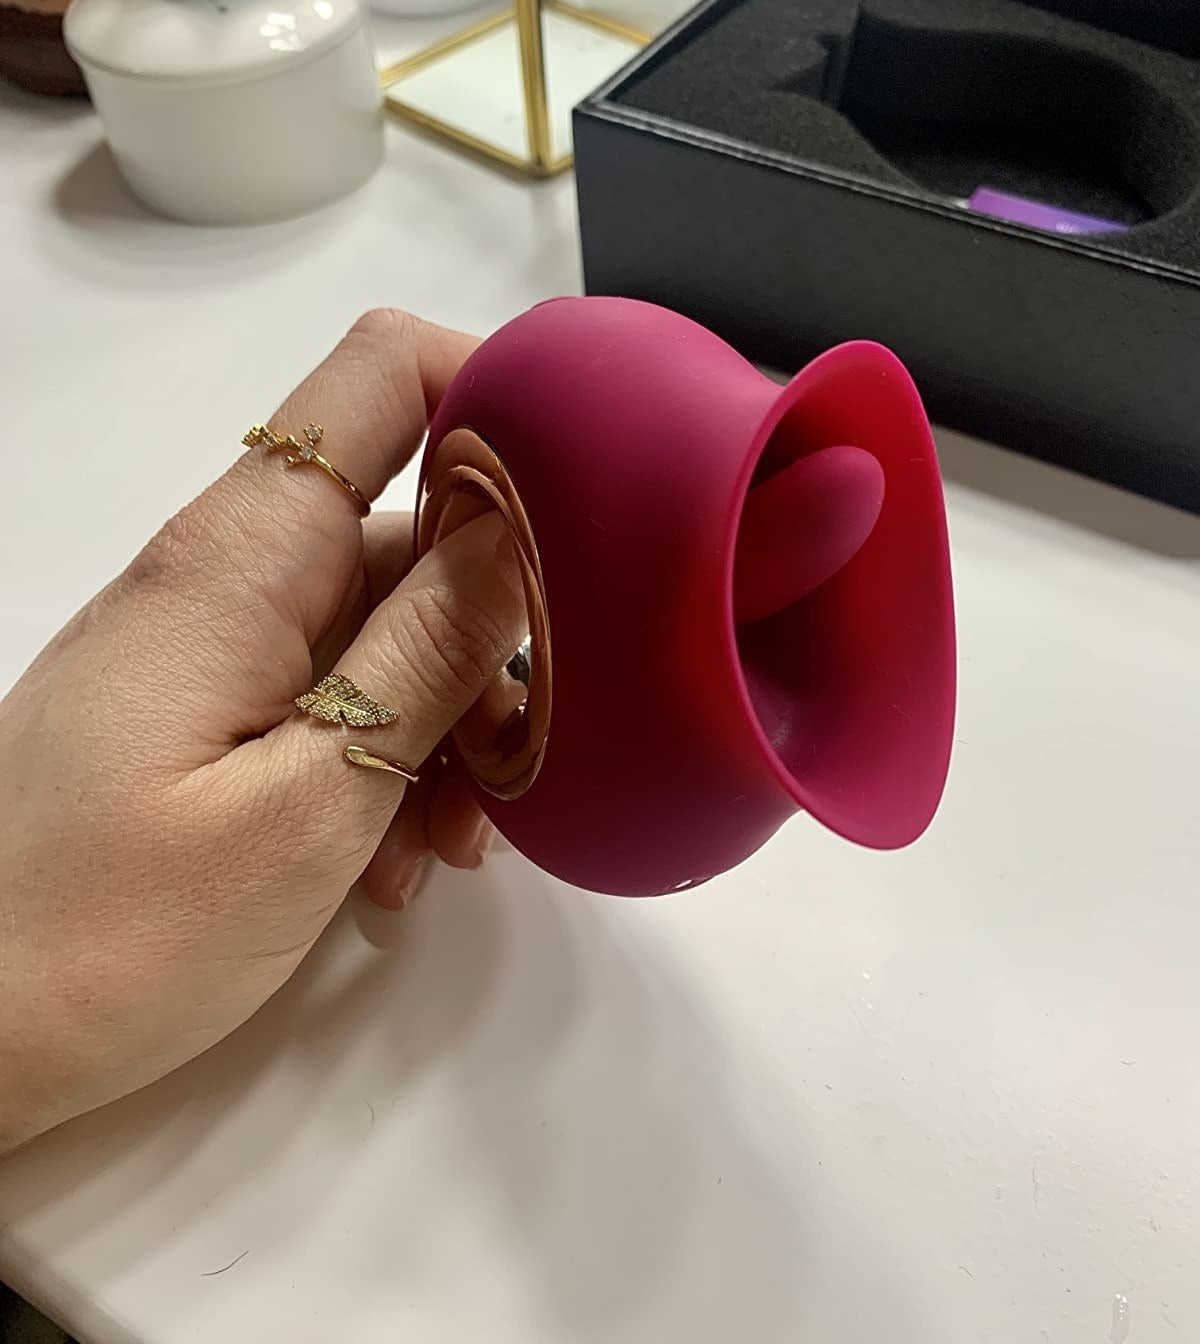 hand holding the rose shaped toy with tongue at opening and a metallic cutout handle at the base